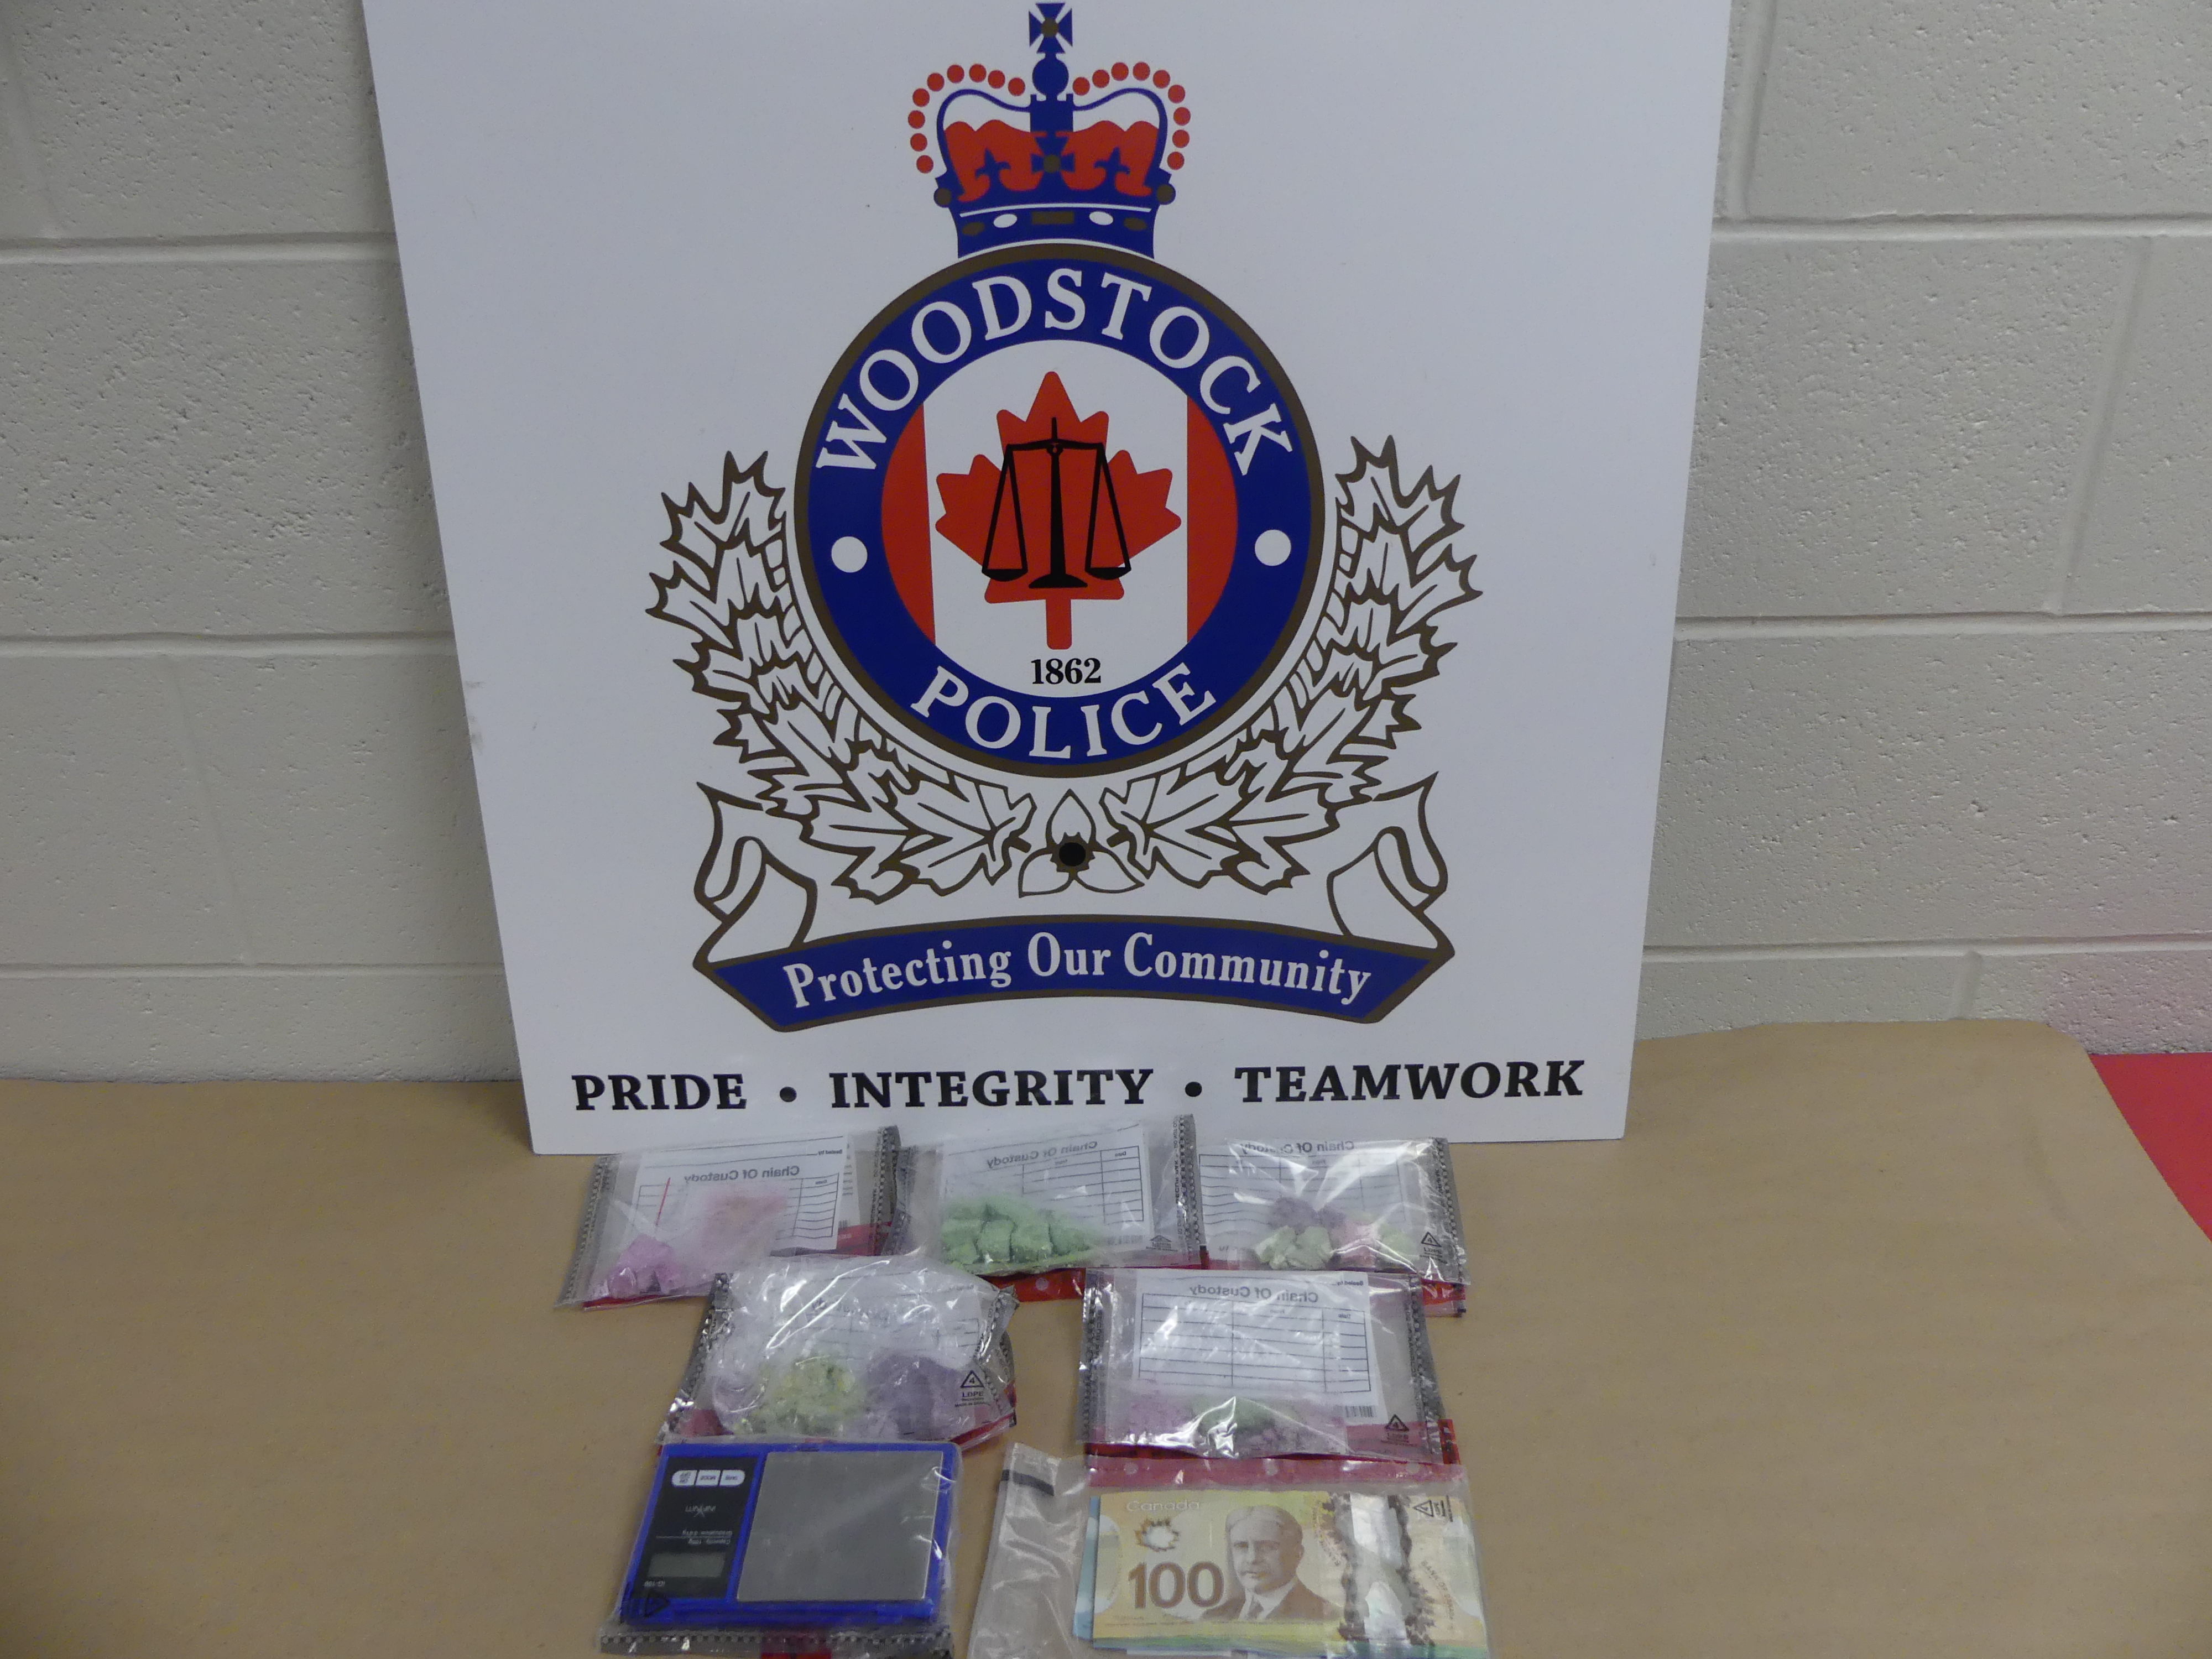 Woodstock Police Logo with packages of drugs, a scale and cash in bags in front of the logo